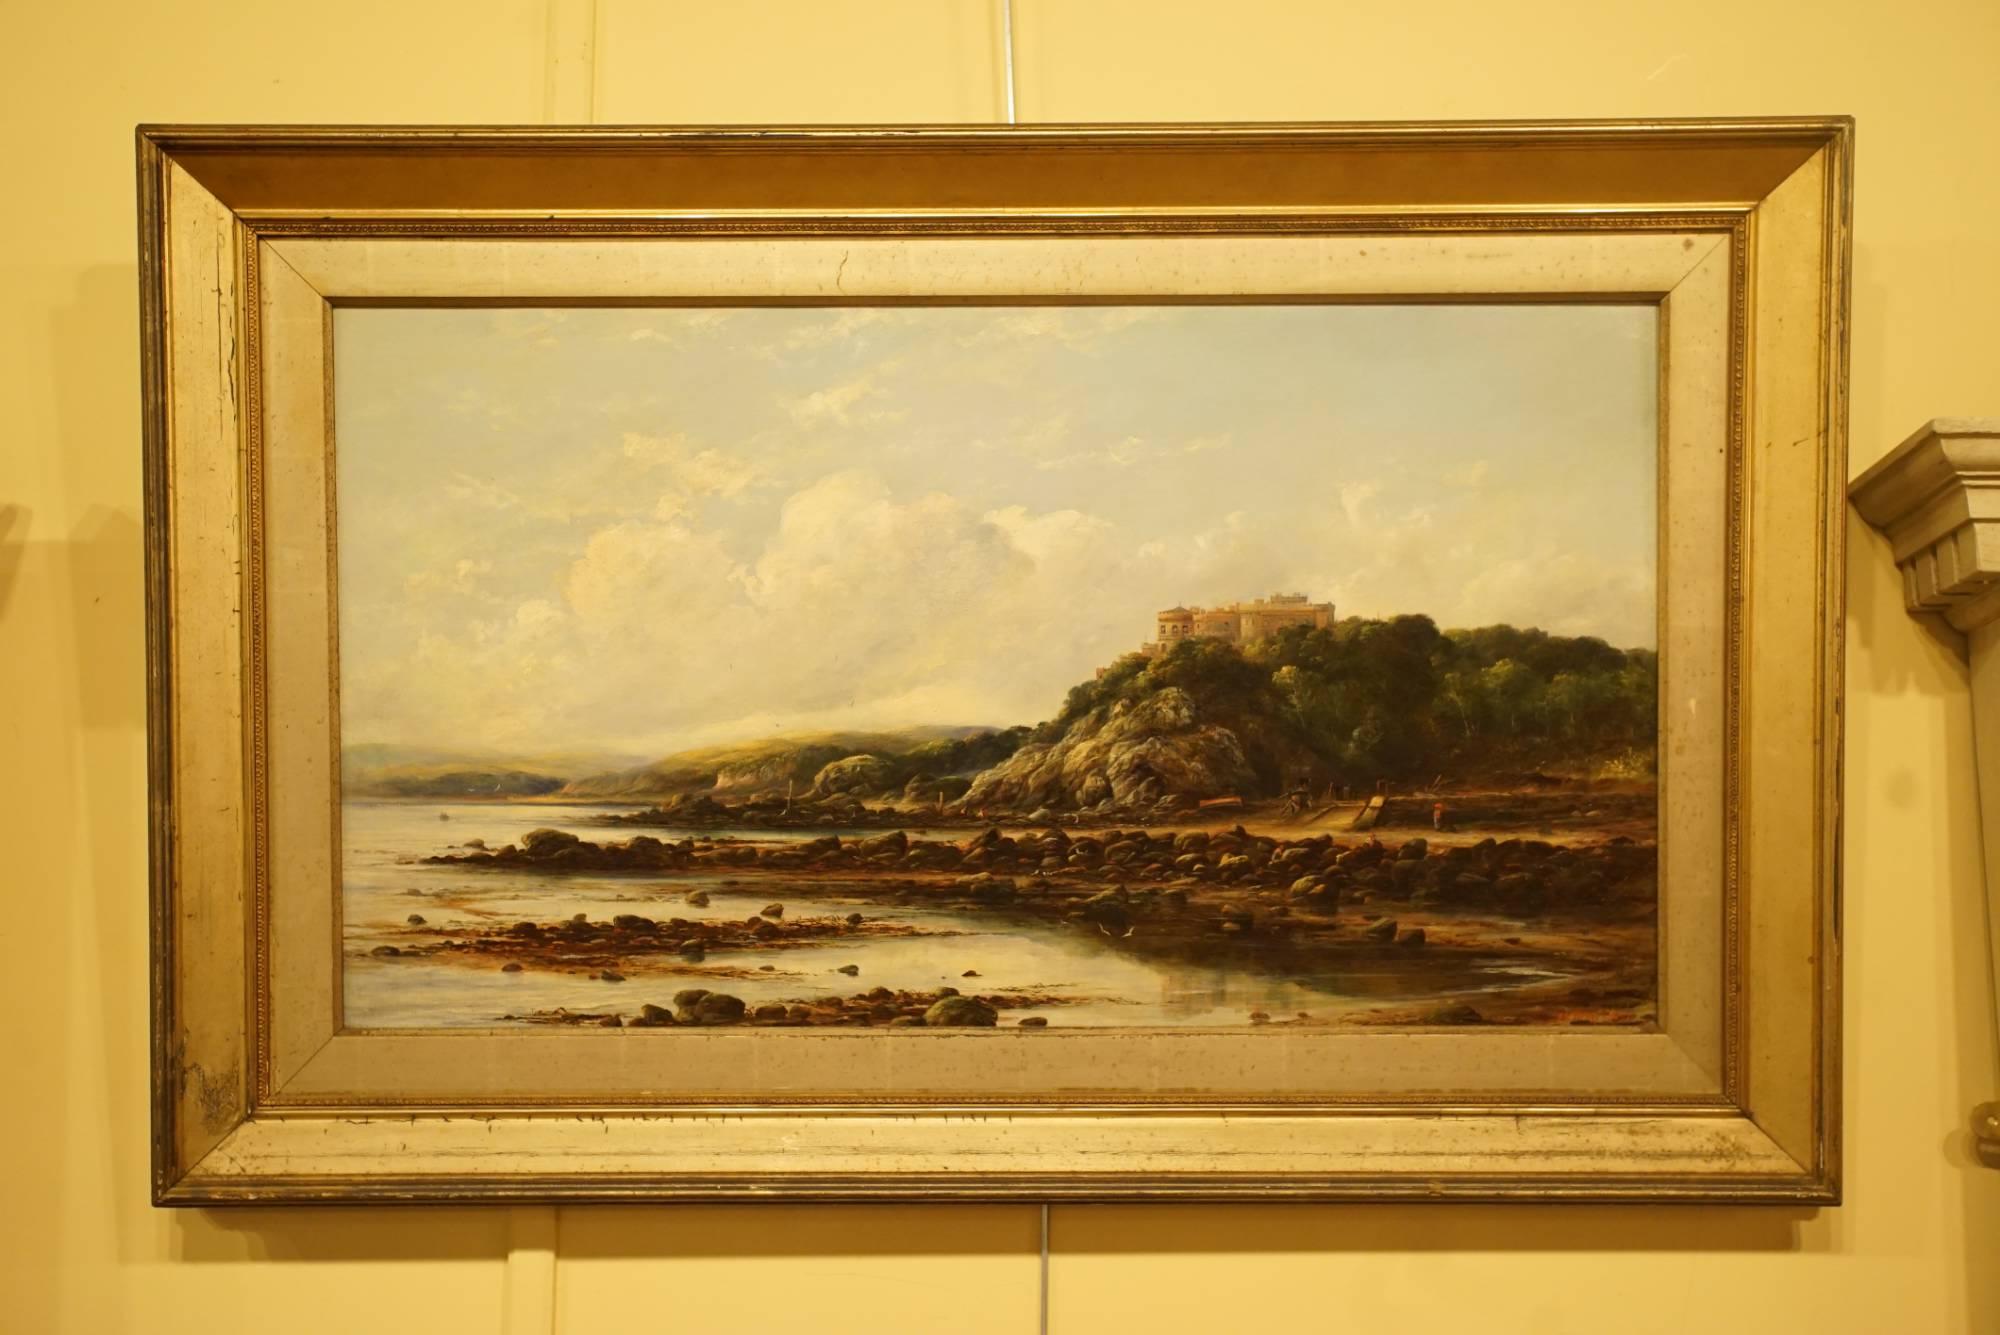 William Temple Muir, 1856-1907

Coastal scene with castle

Oil on canvas signed and dated 1890.